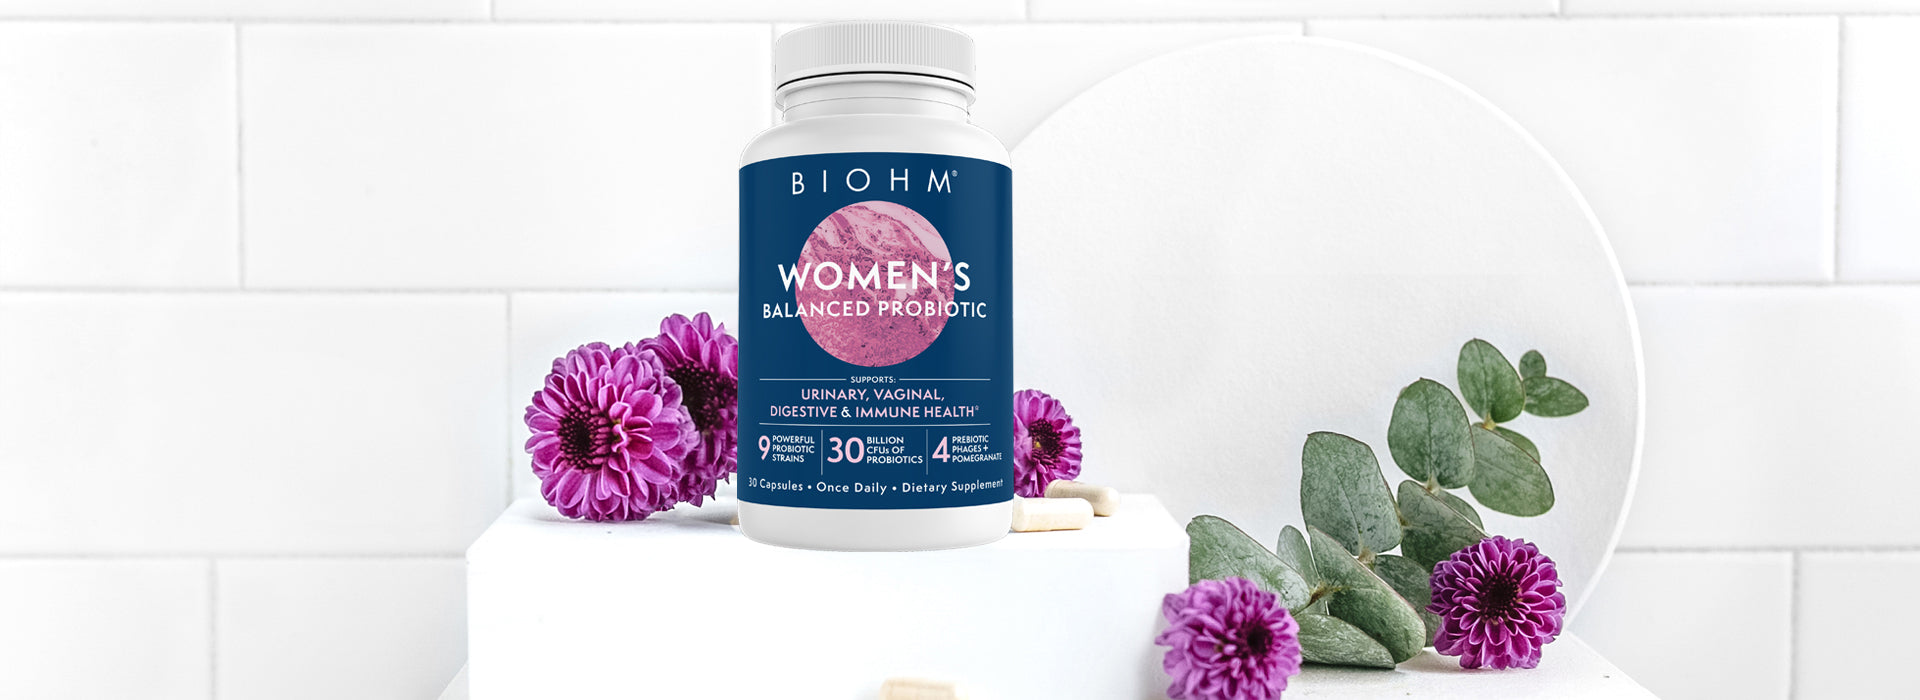 Women's Balanced Probiotic with flowers